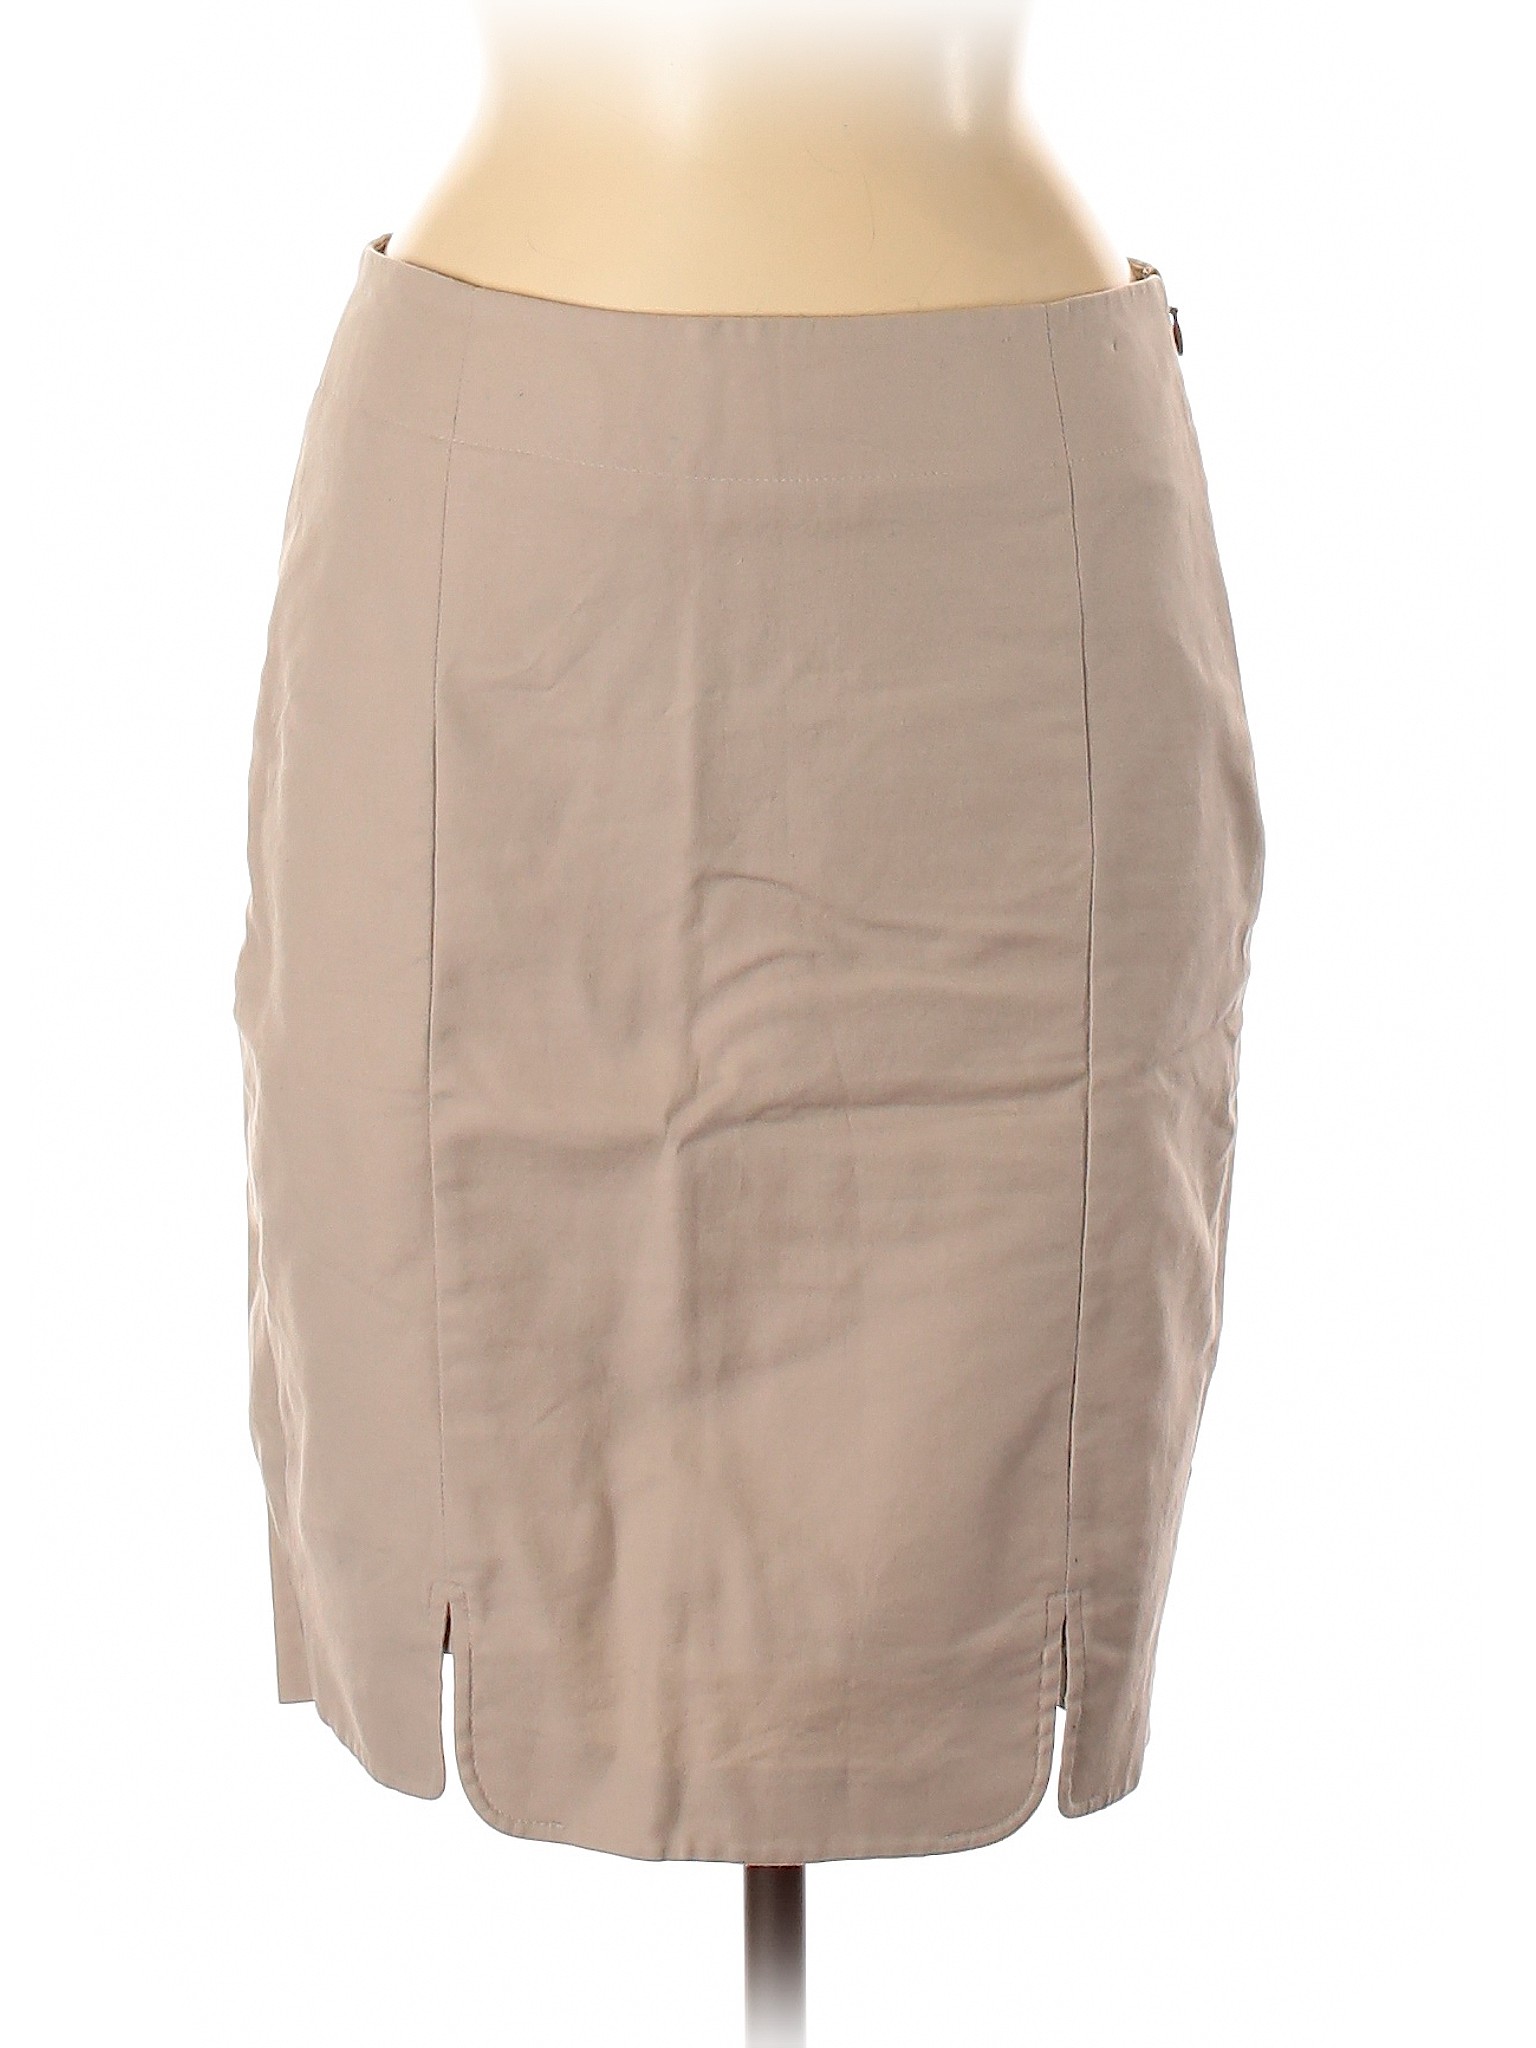 The Limited Women Brown Casual Skirt 6 | eBay